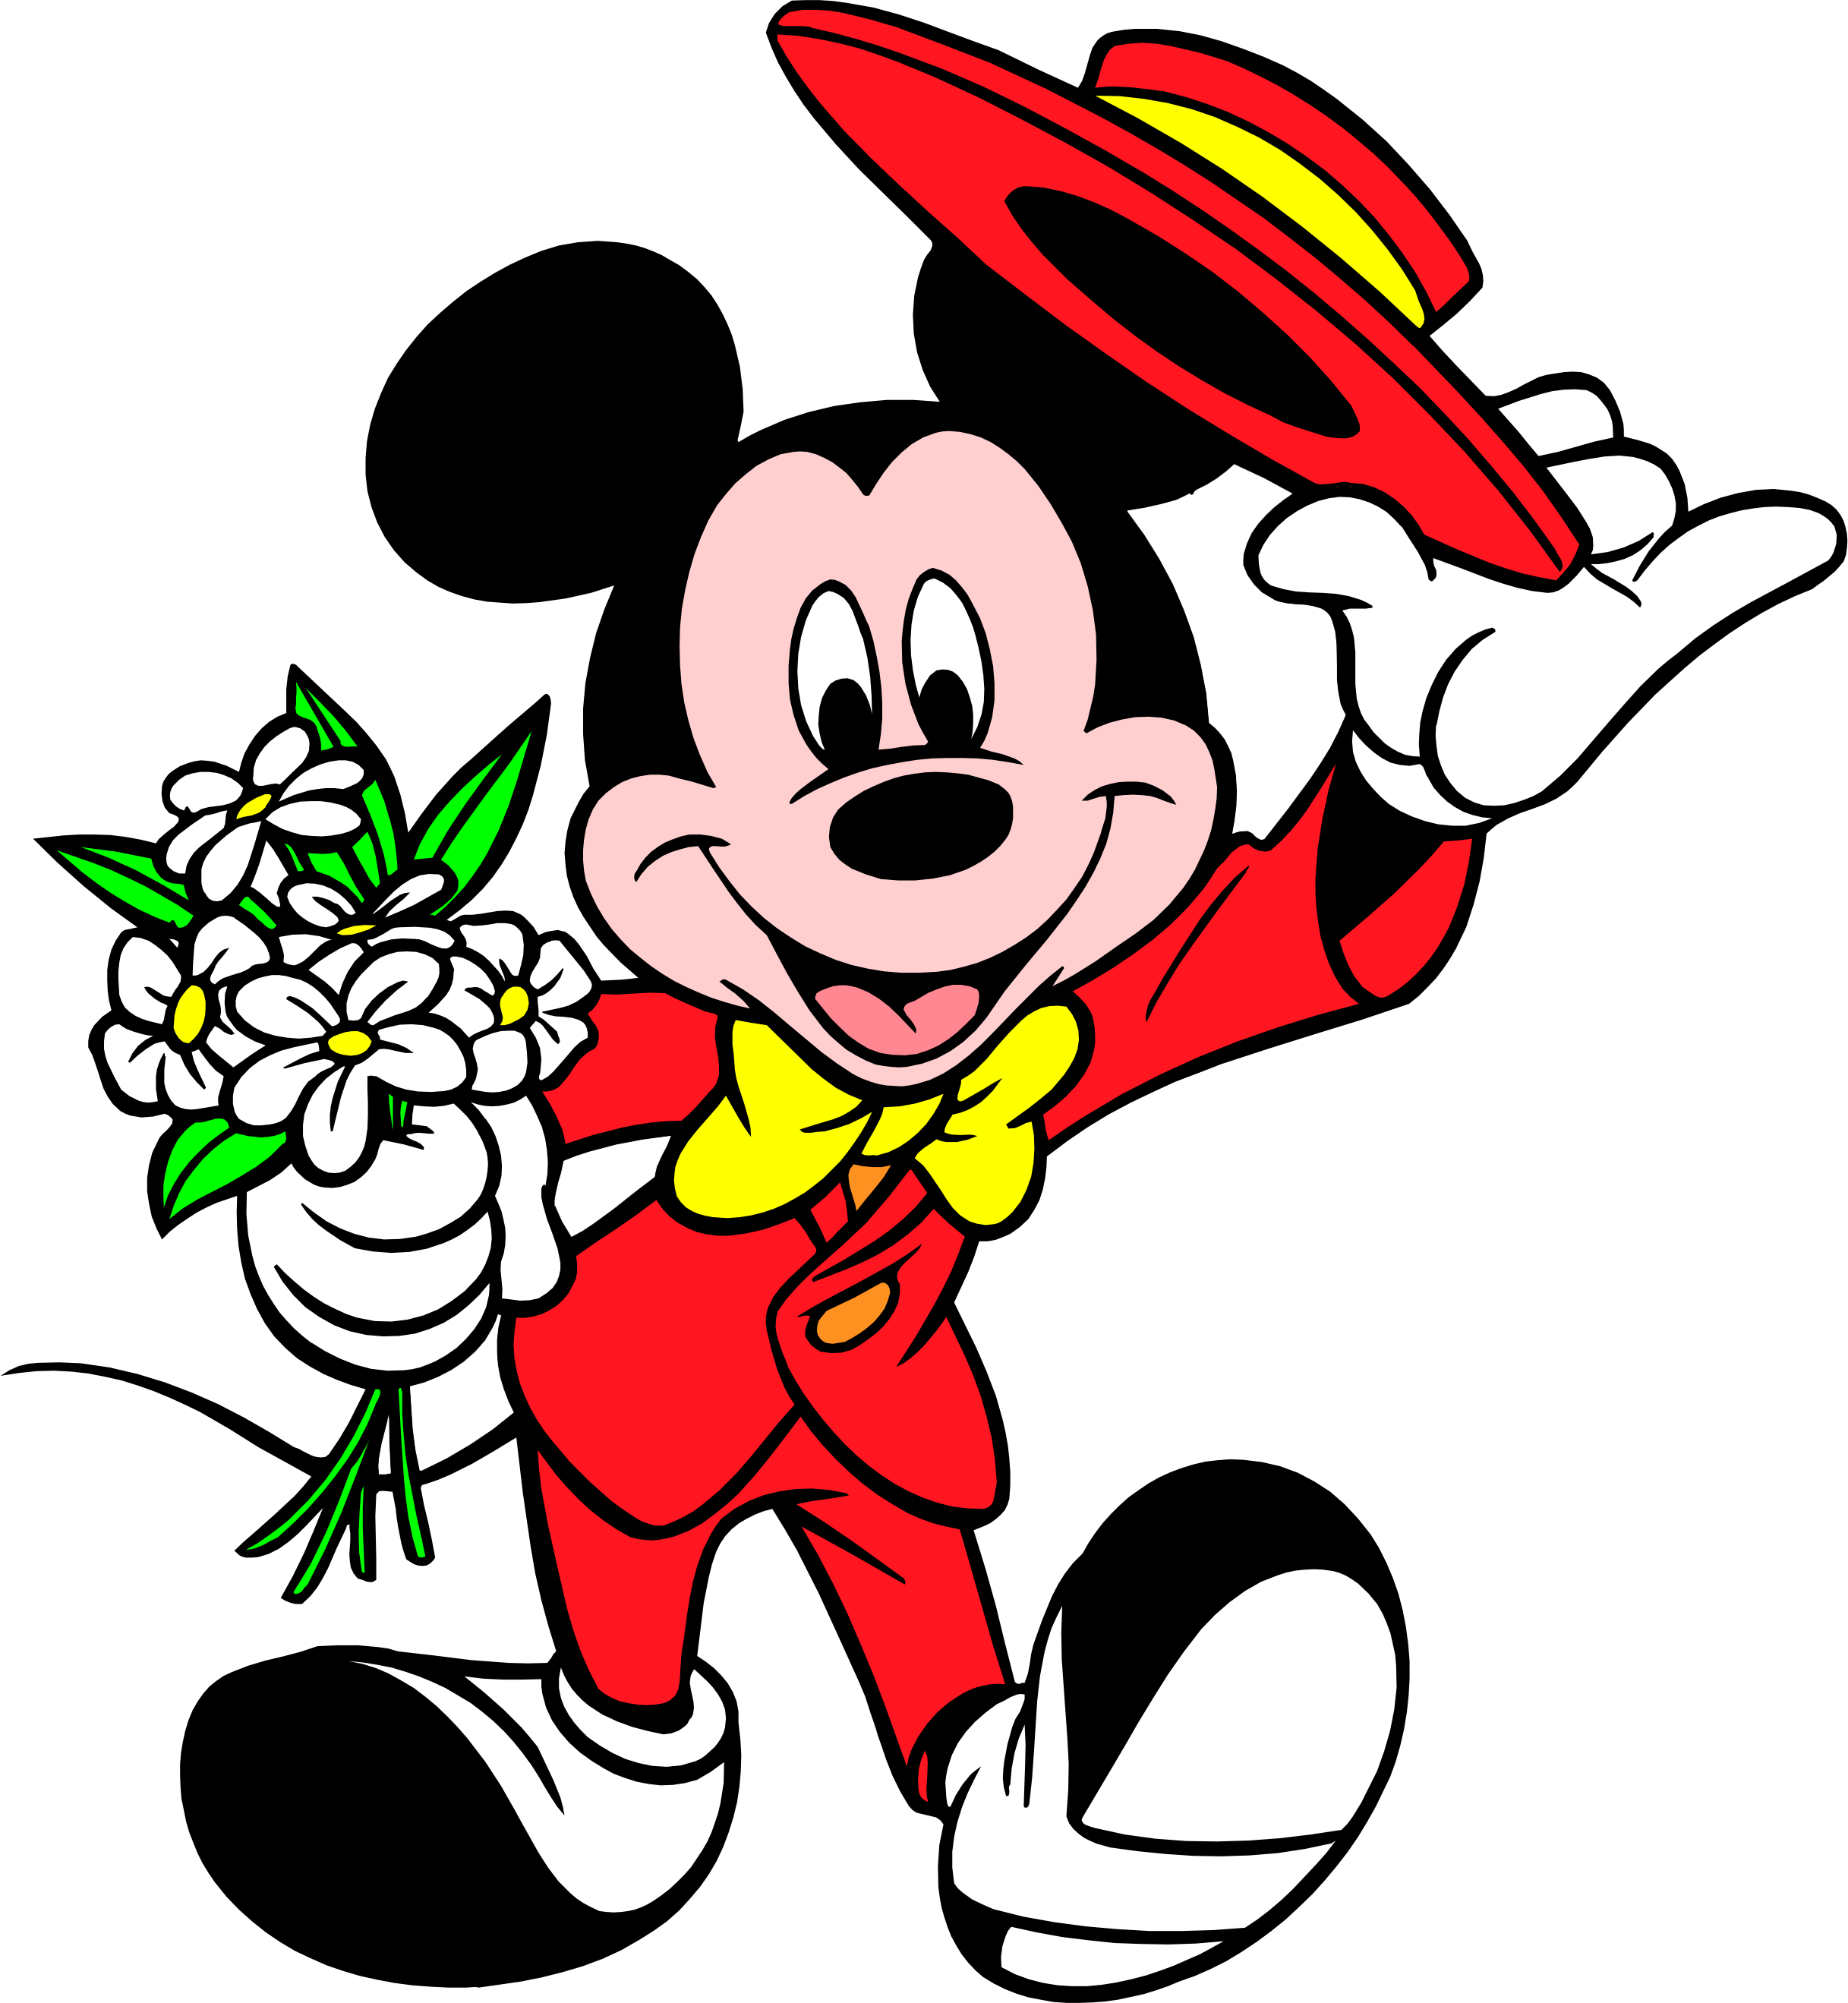 Land clipart empty garden. Mickey mouse by convitex